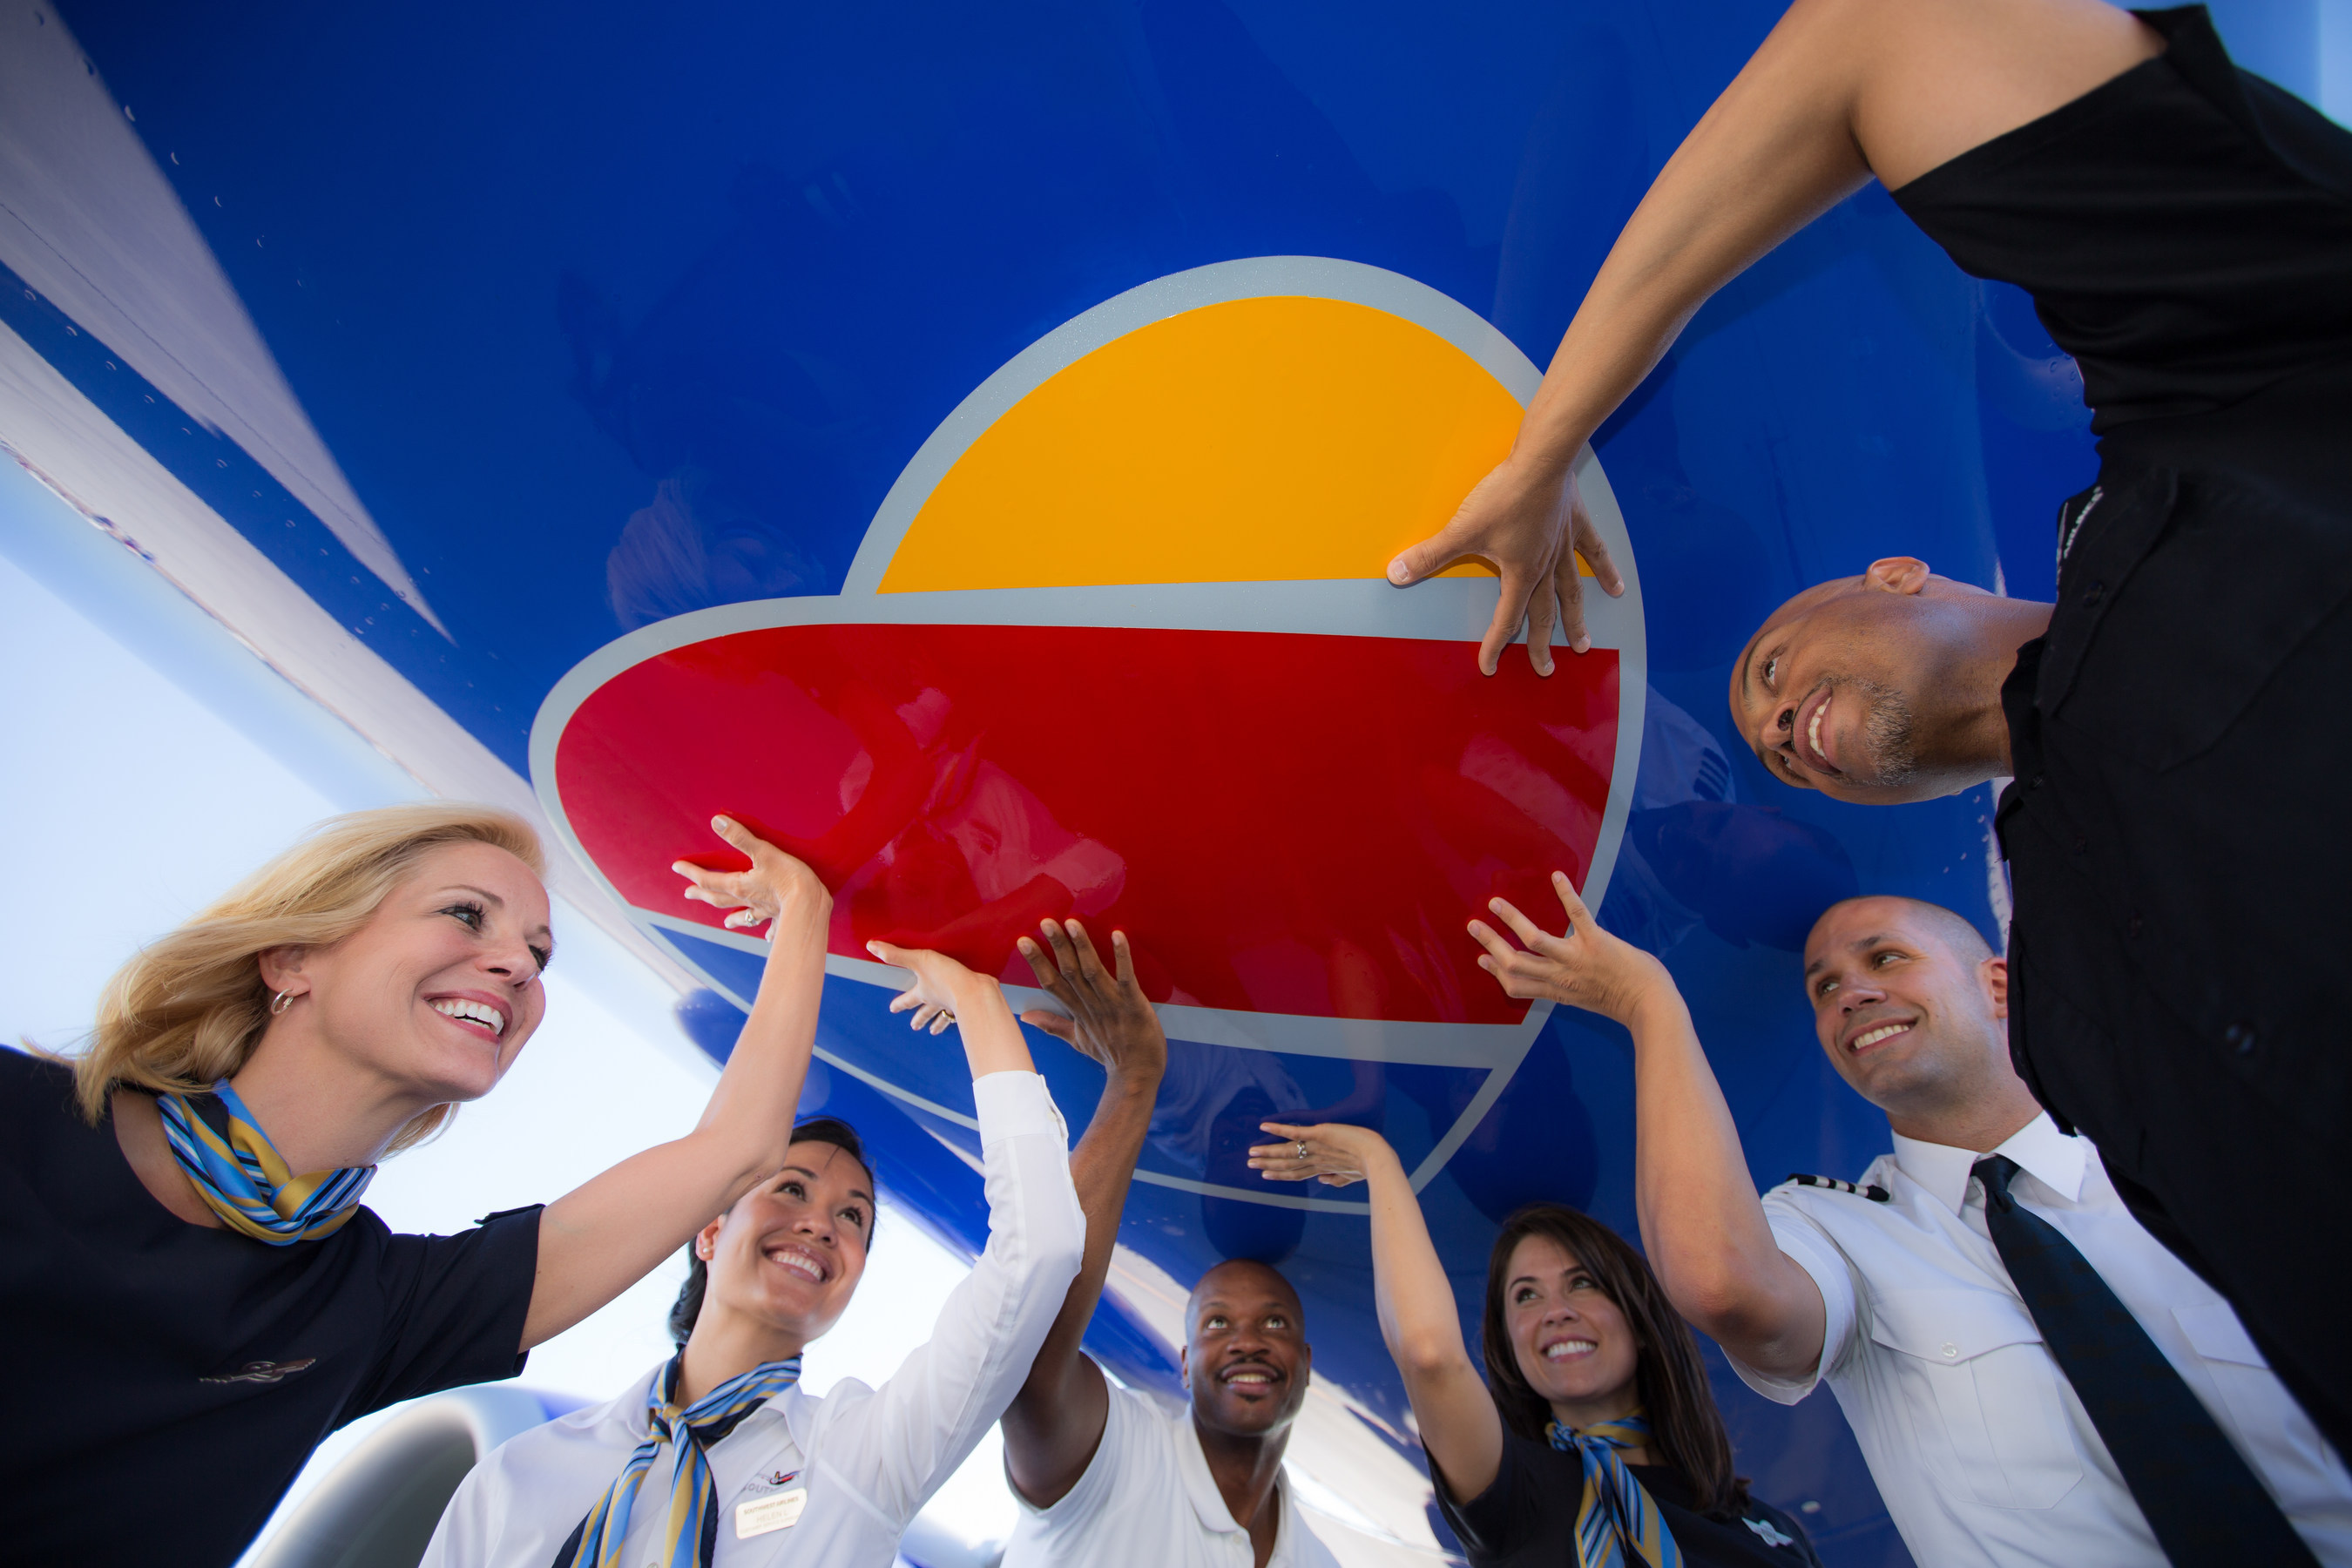 Southwest Airlines' Bold Look; Same #SouthwestHeart